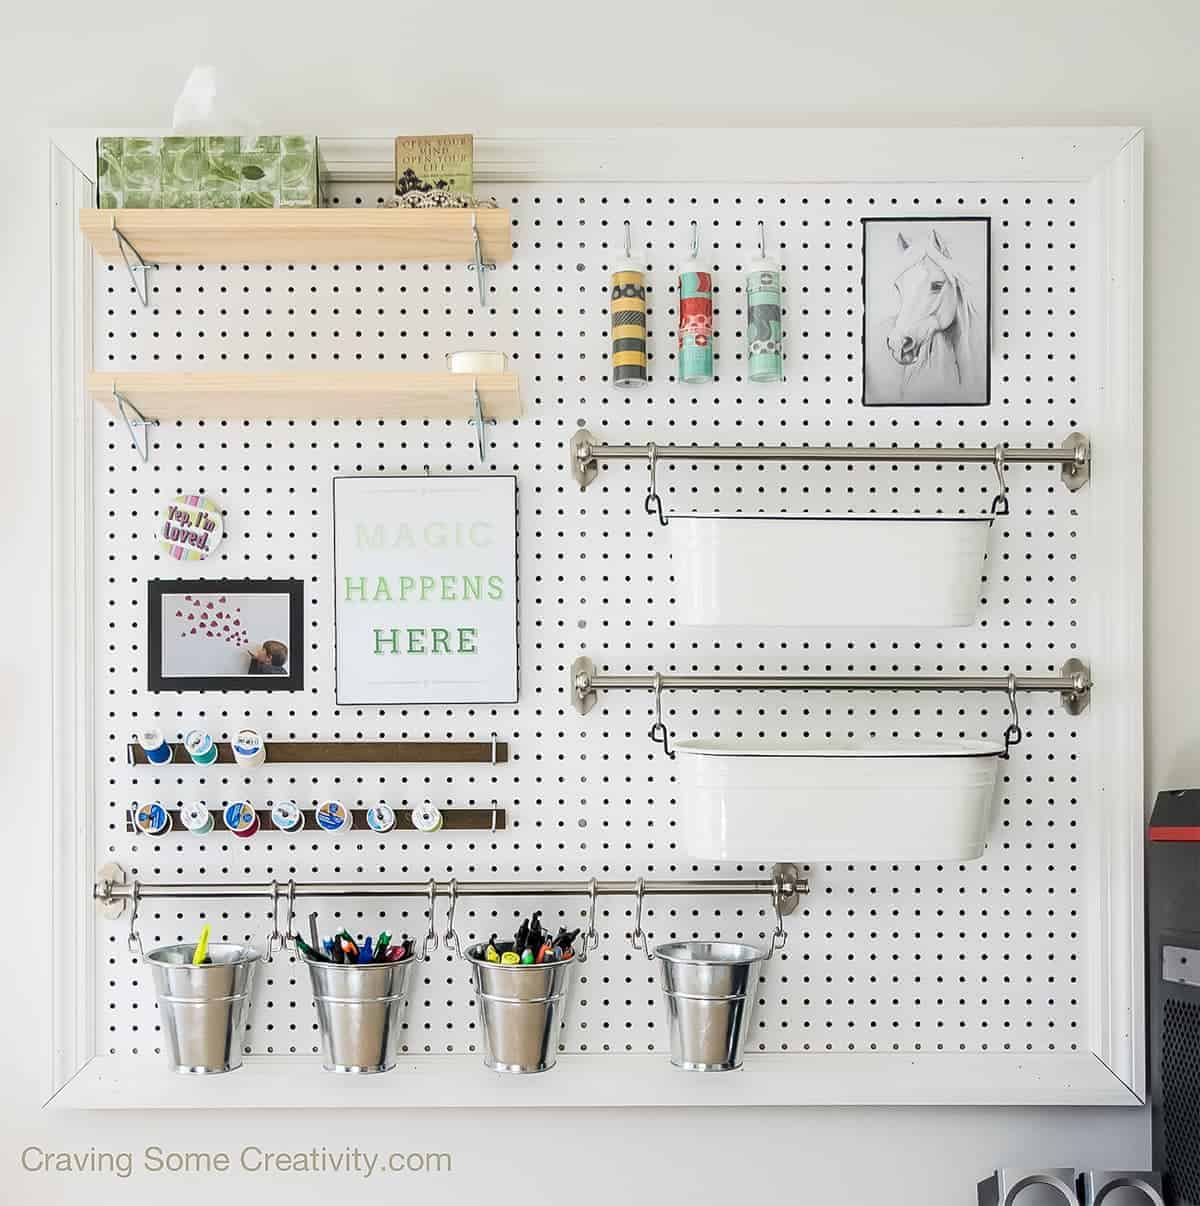 Large pegboard with frame that holds office supplies in bins and shelves.